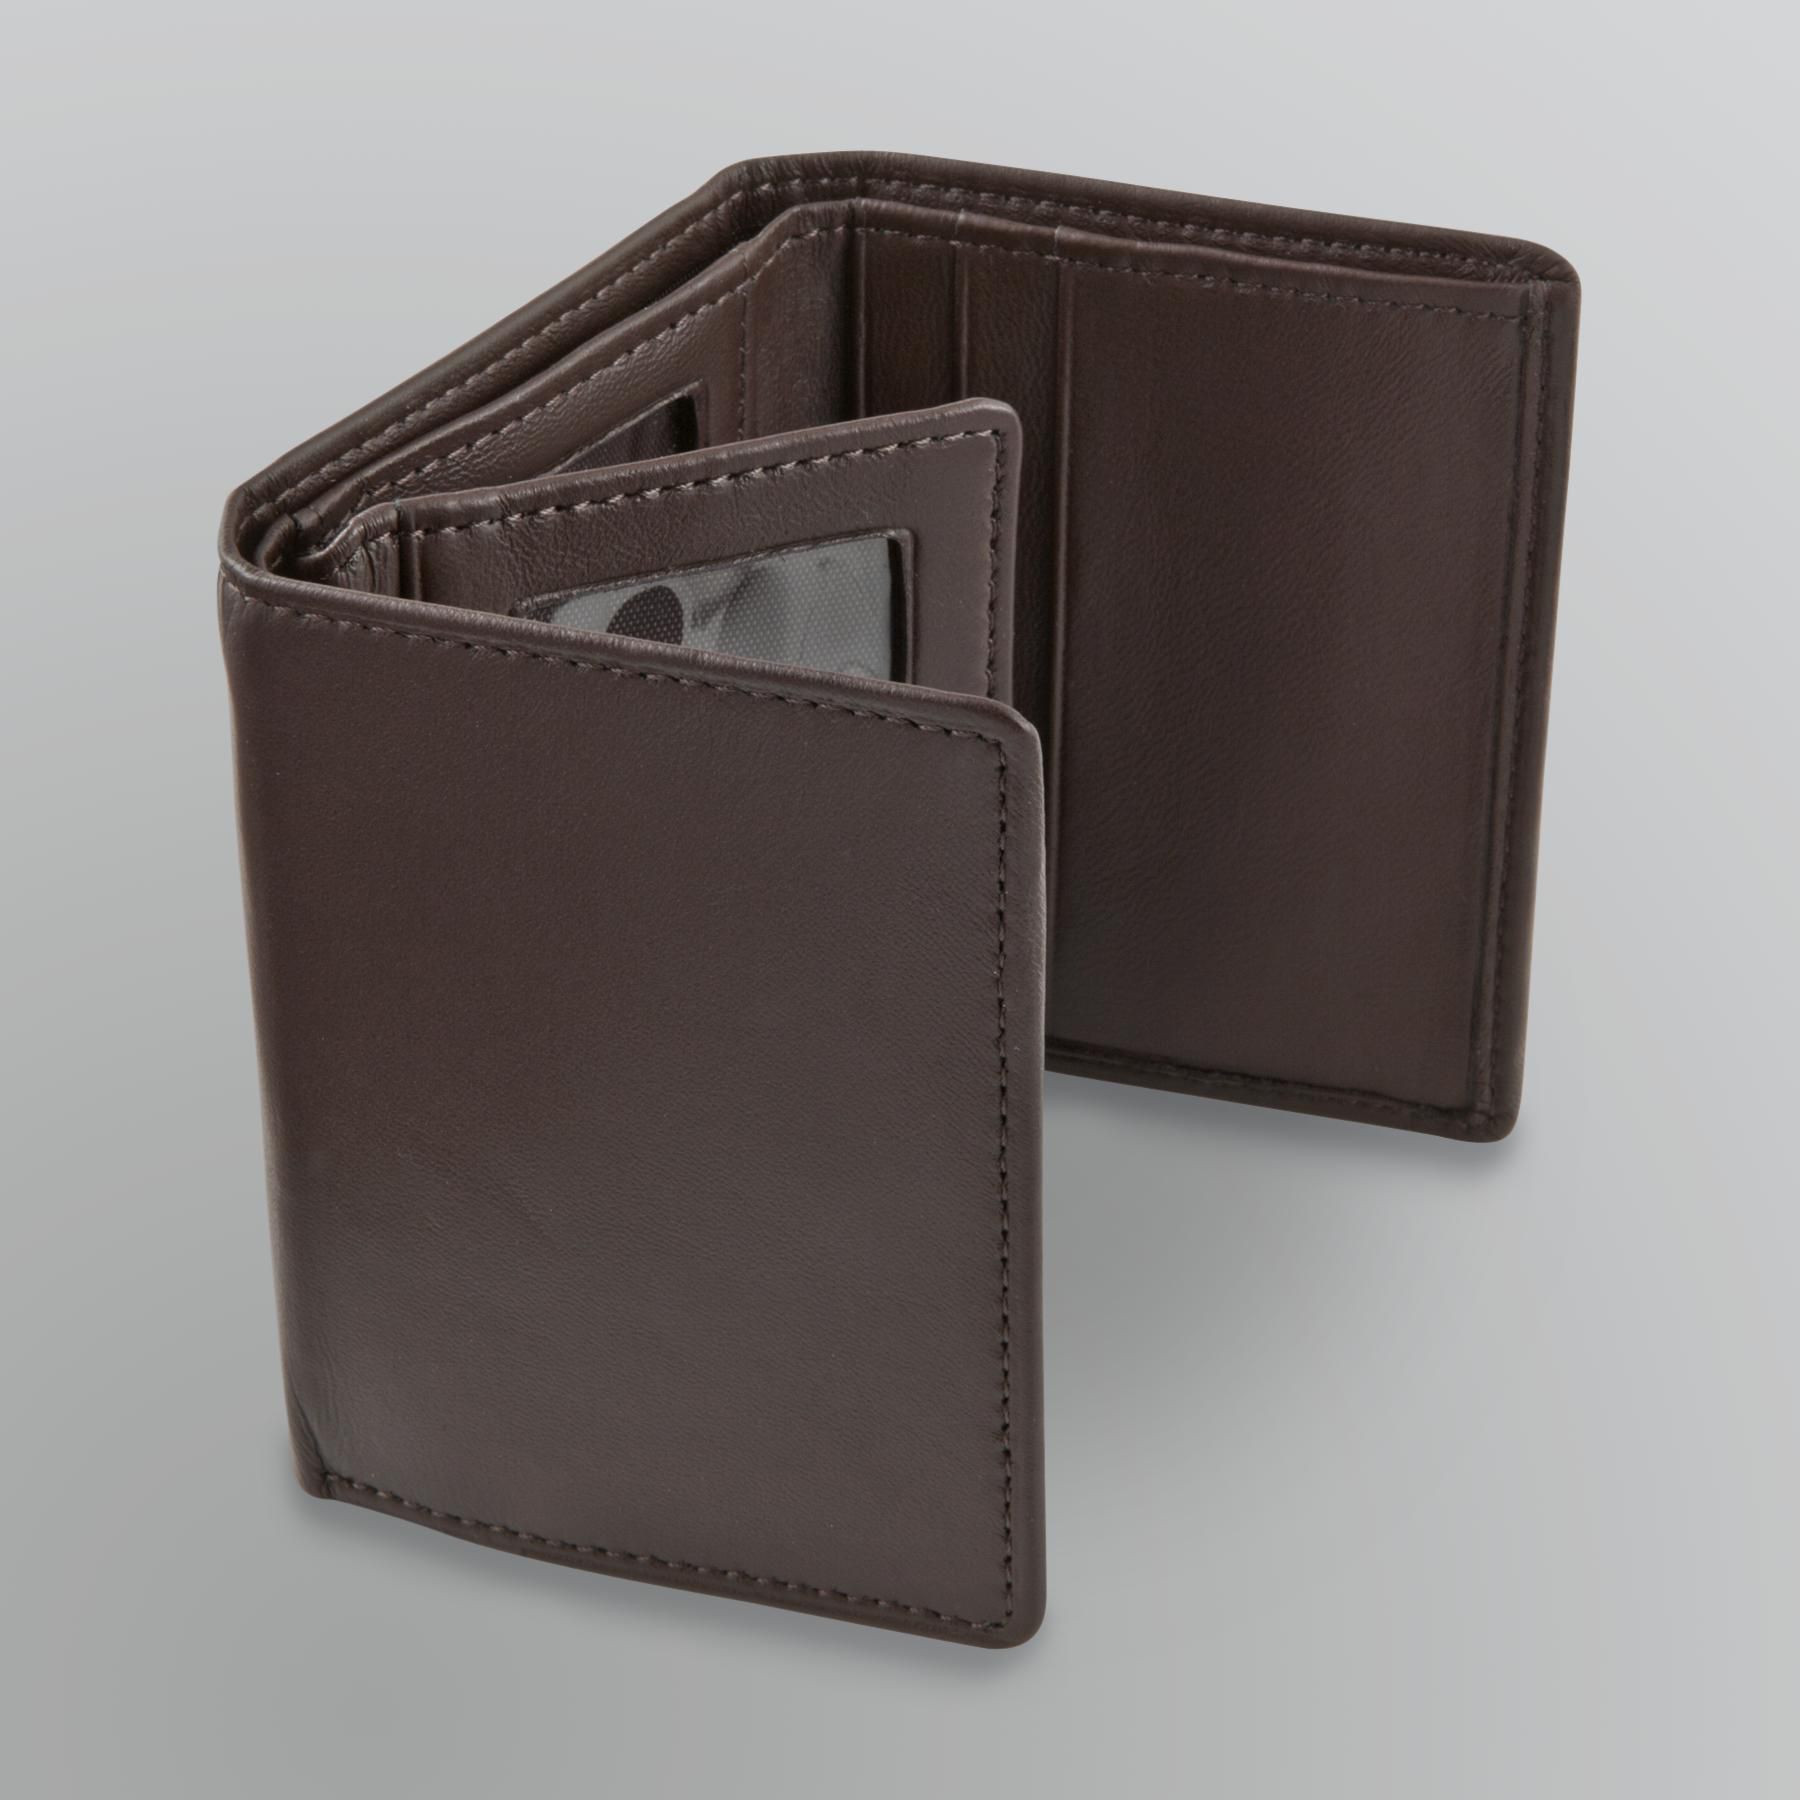 David Taylor Collection Men's Trifold Wallet